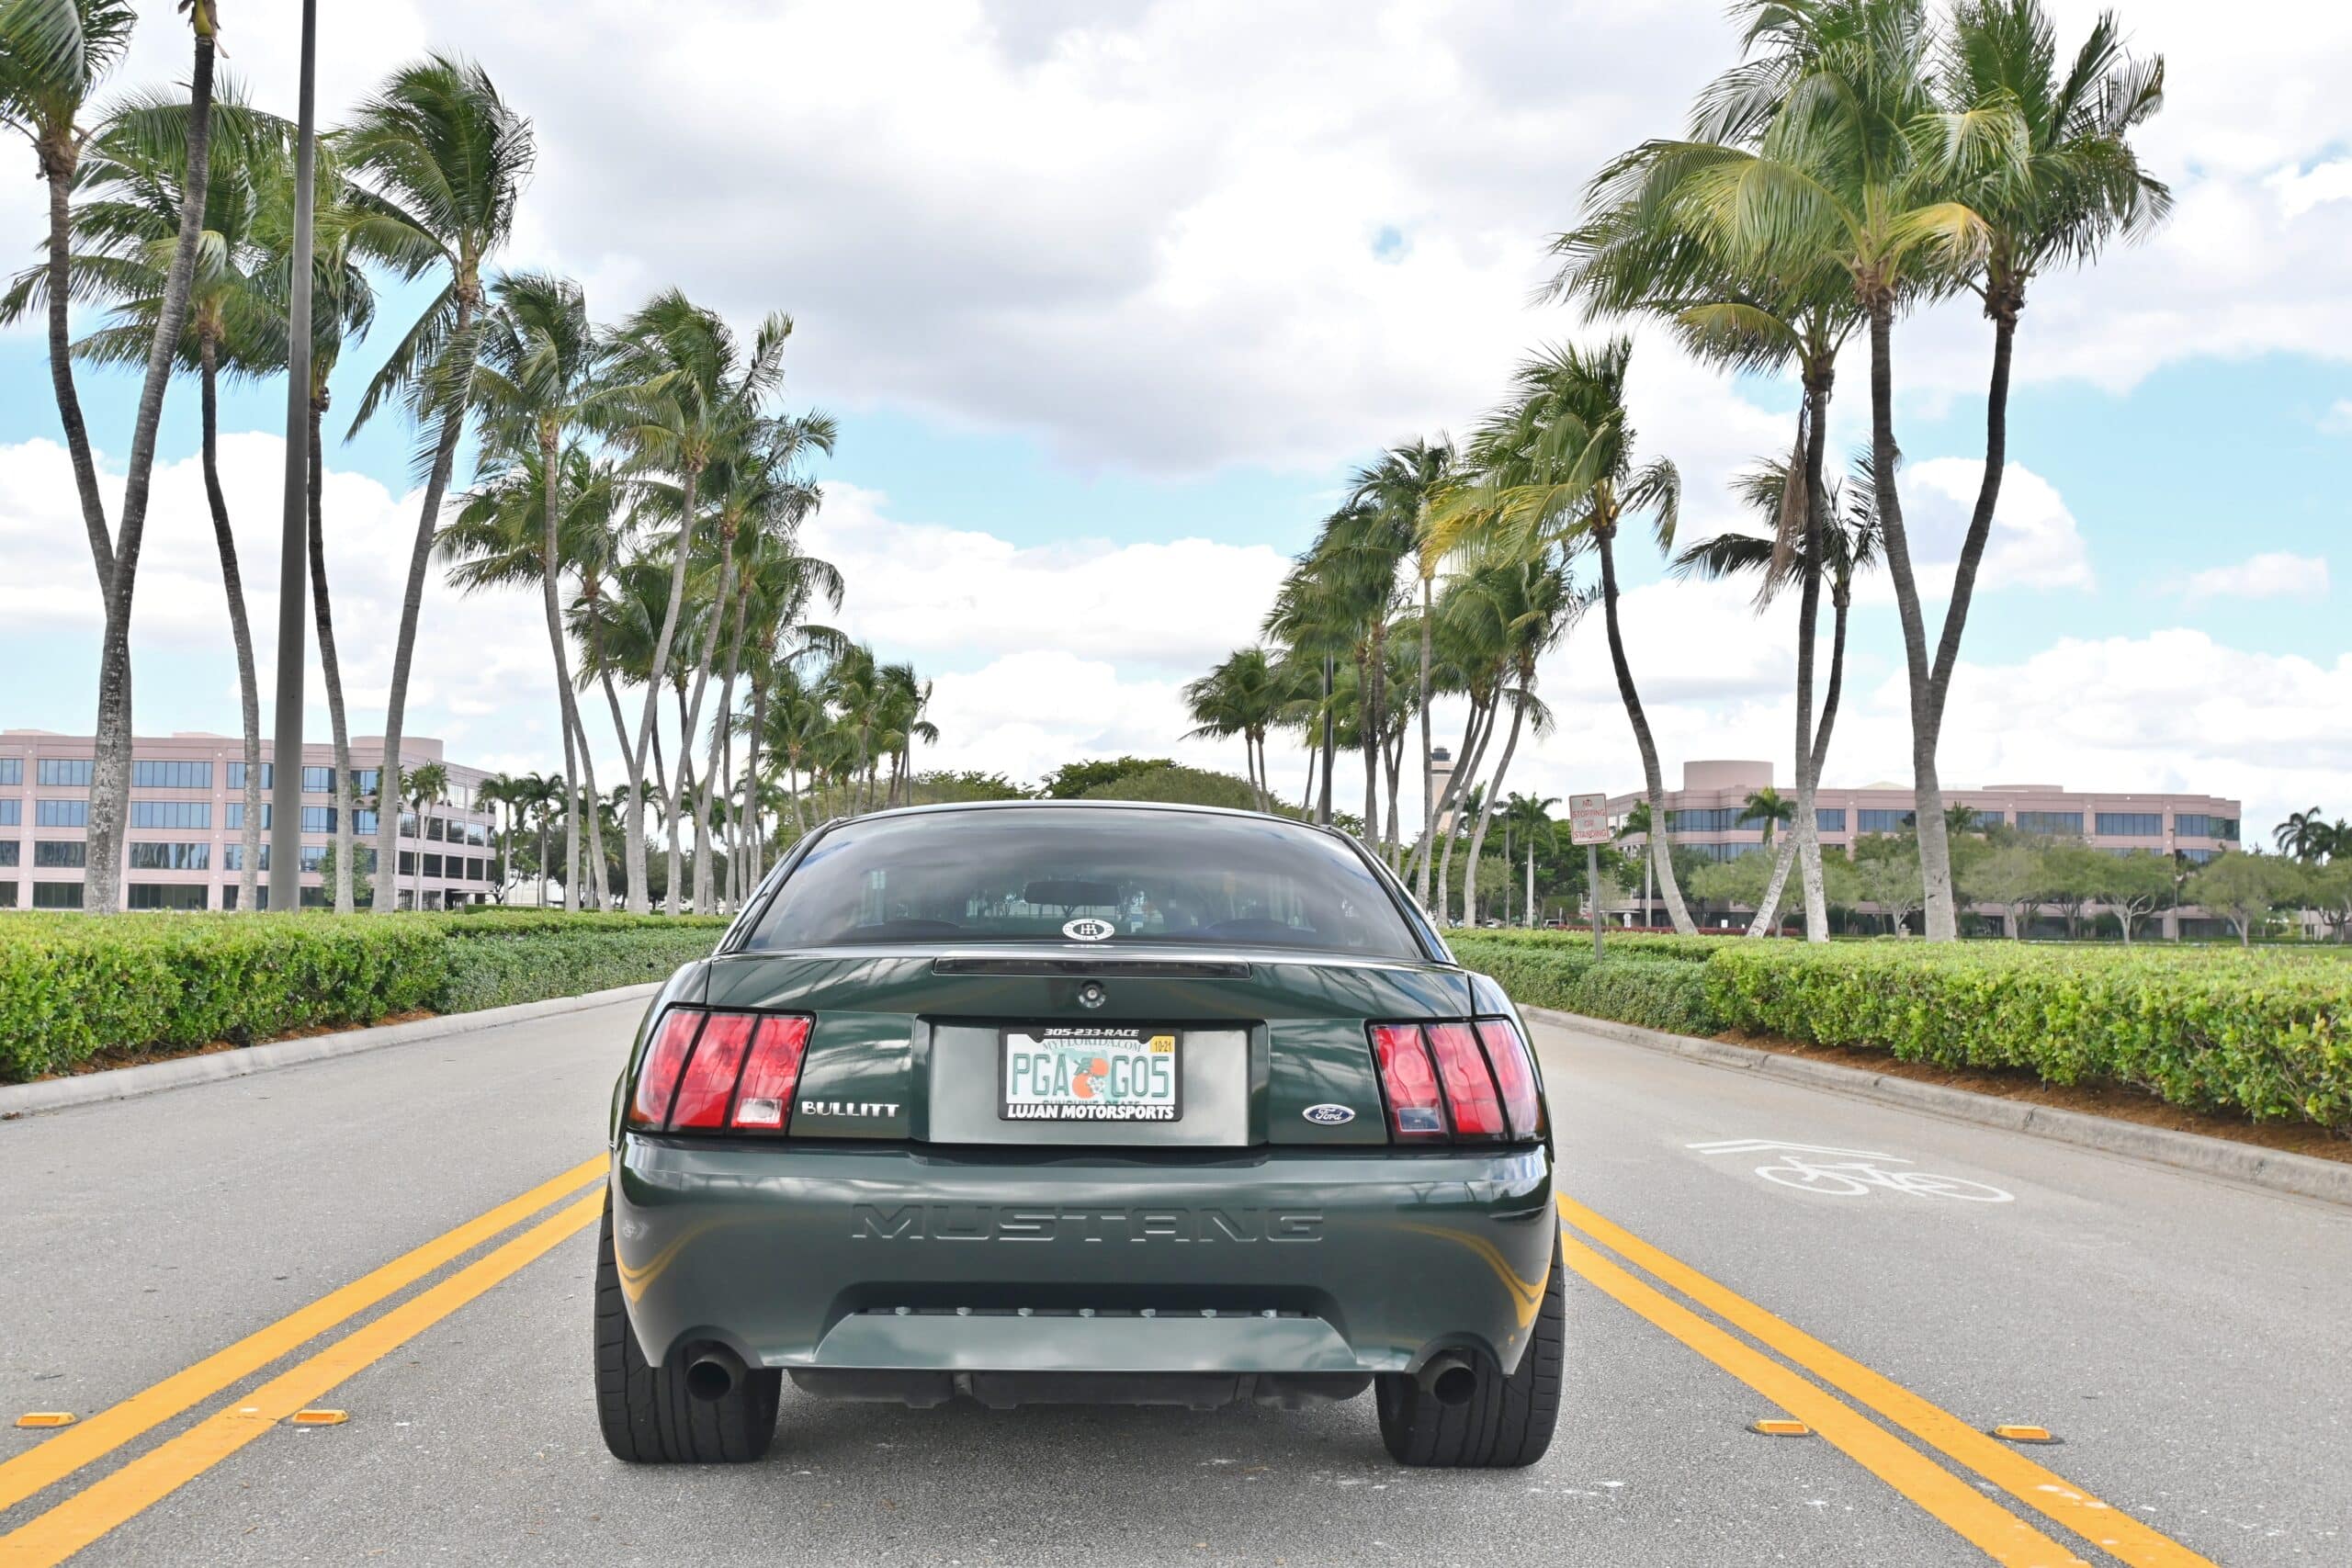 2001 Ford Mustang Bullitt #4382 1 of 5,582 ever made Nicely Modified /Supercharged /Well Sorted /Only 72k Miles